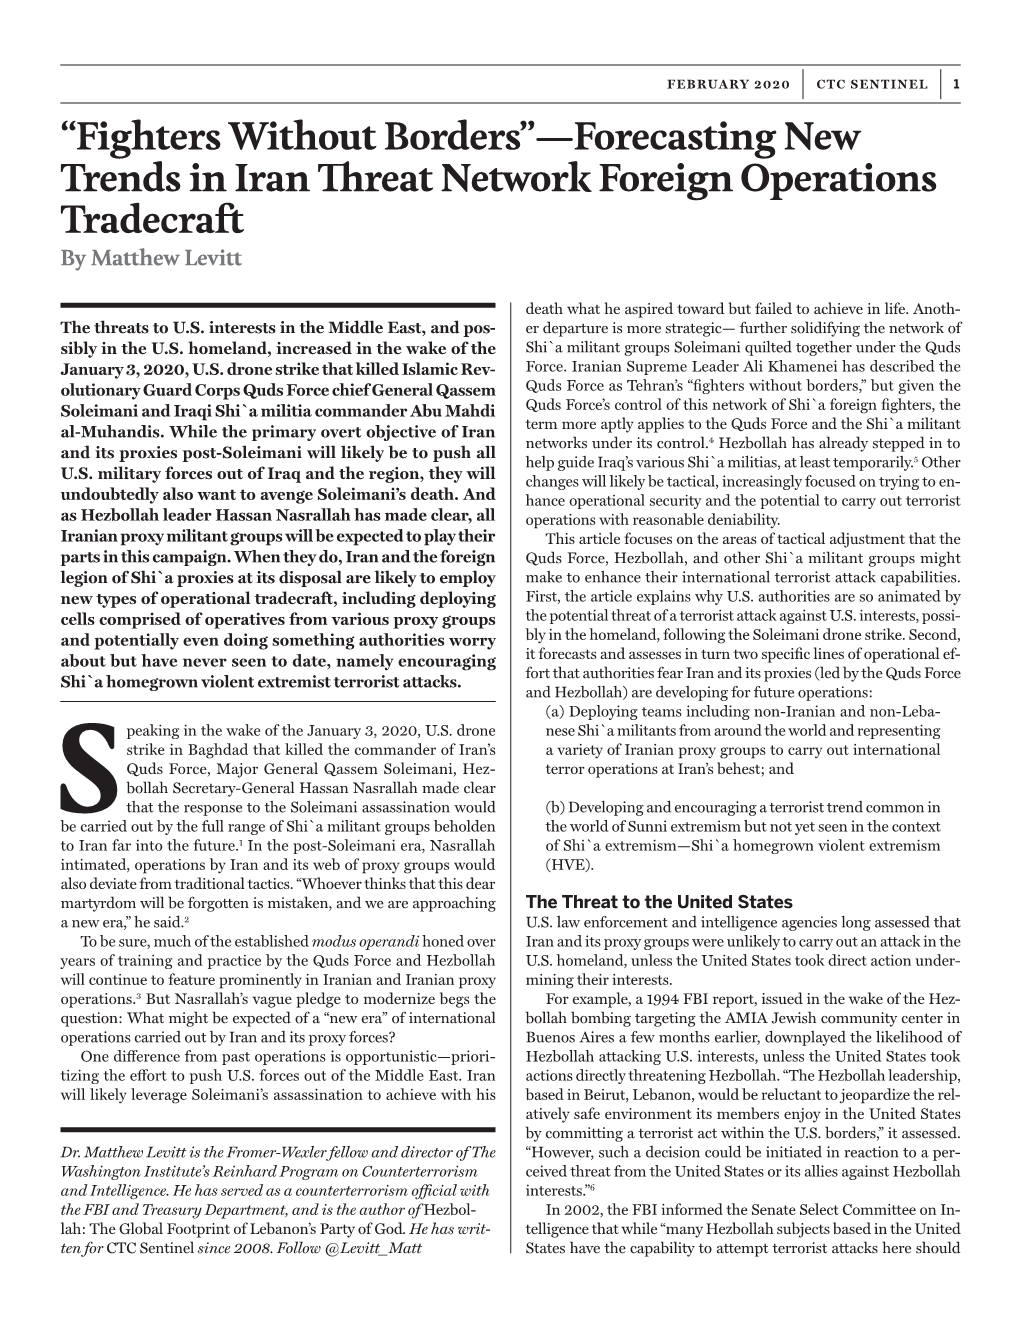 Forecasting New Trends in Iran Threat Network Foreign Operations Tradecraft by Matthew Levitt